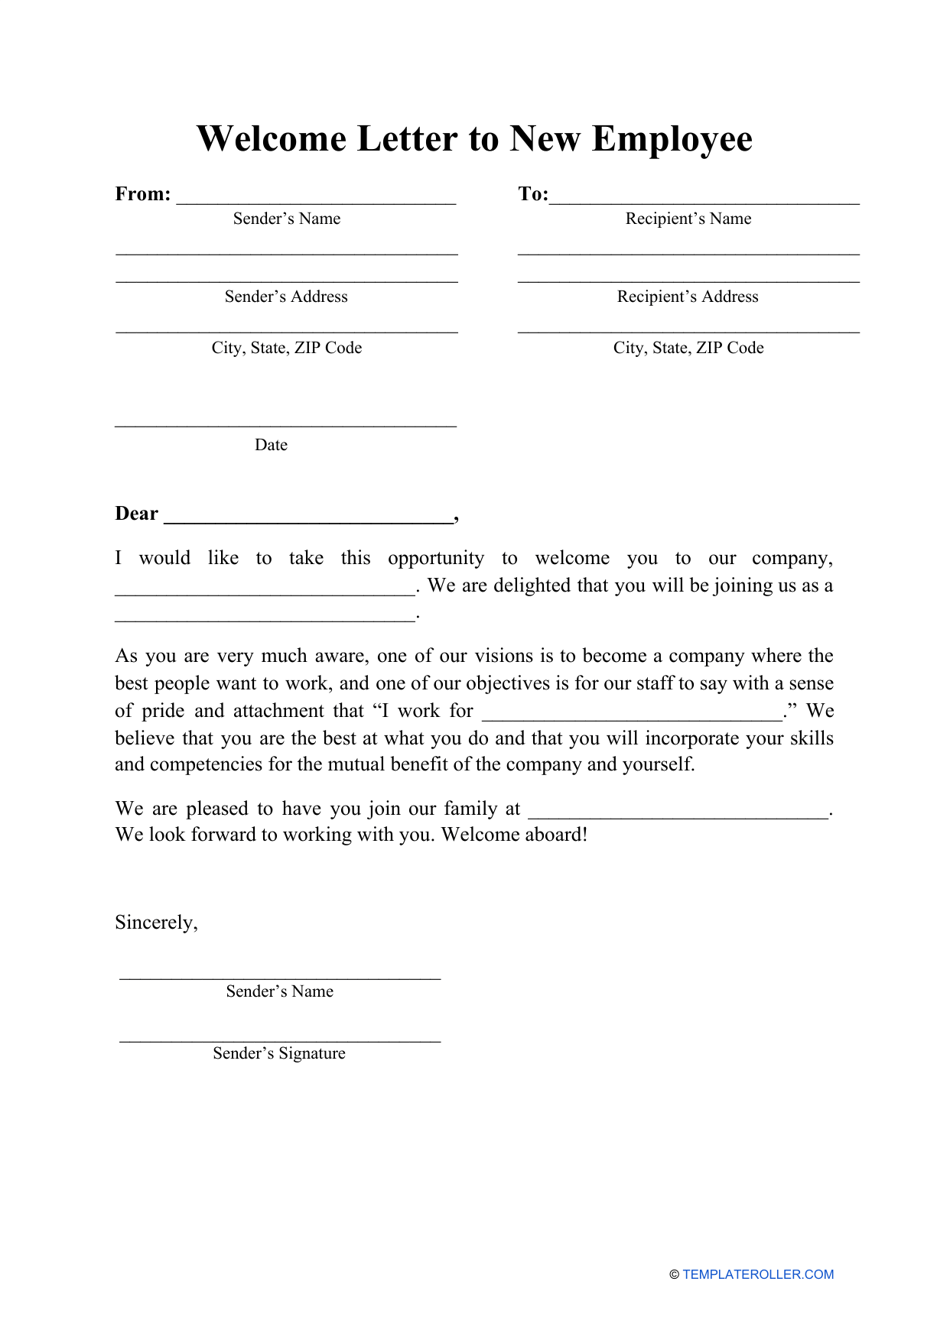 Welcome Letter to New Employee Template, Page 1